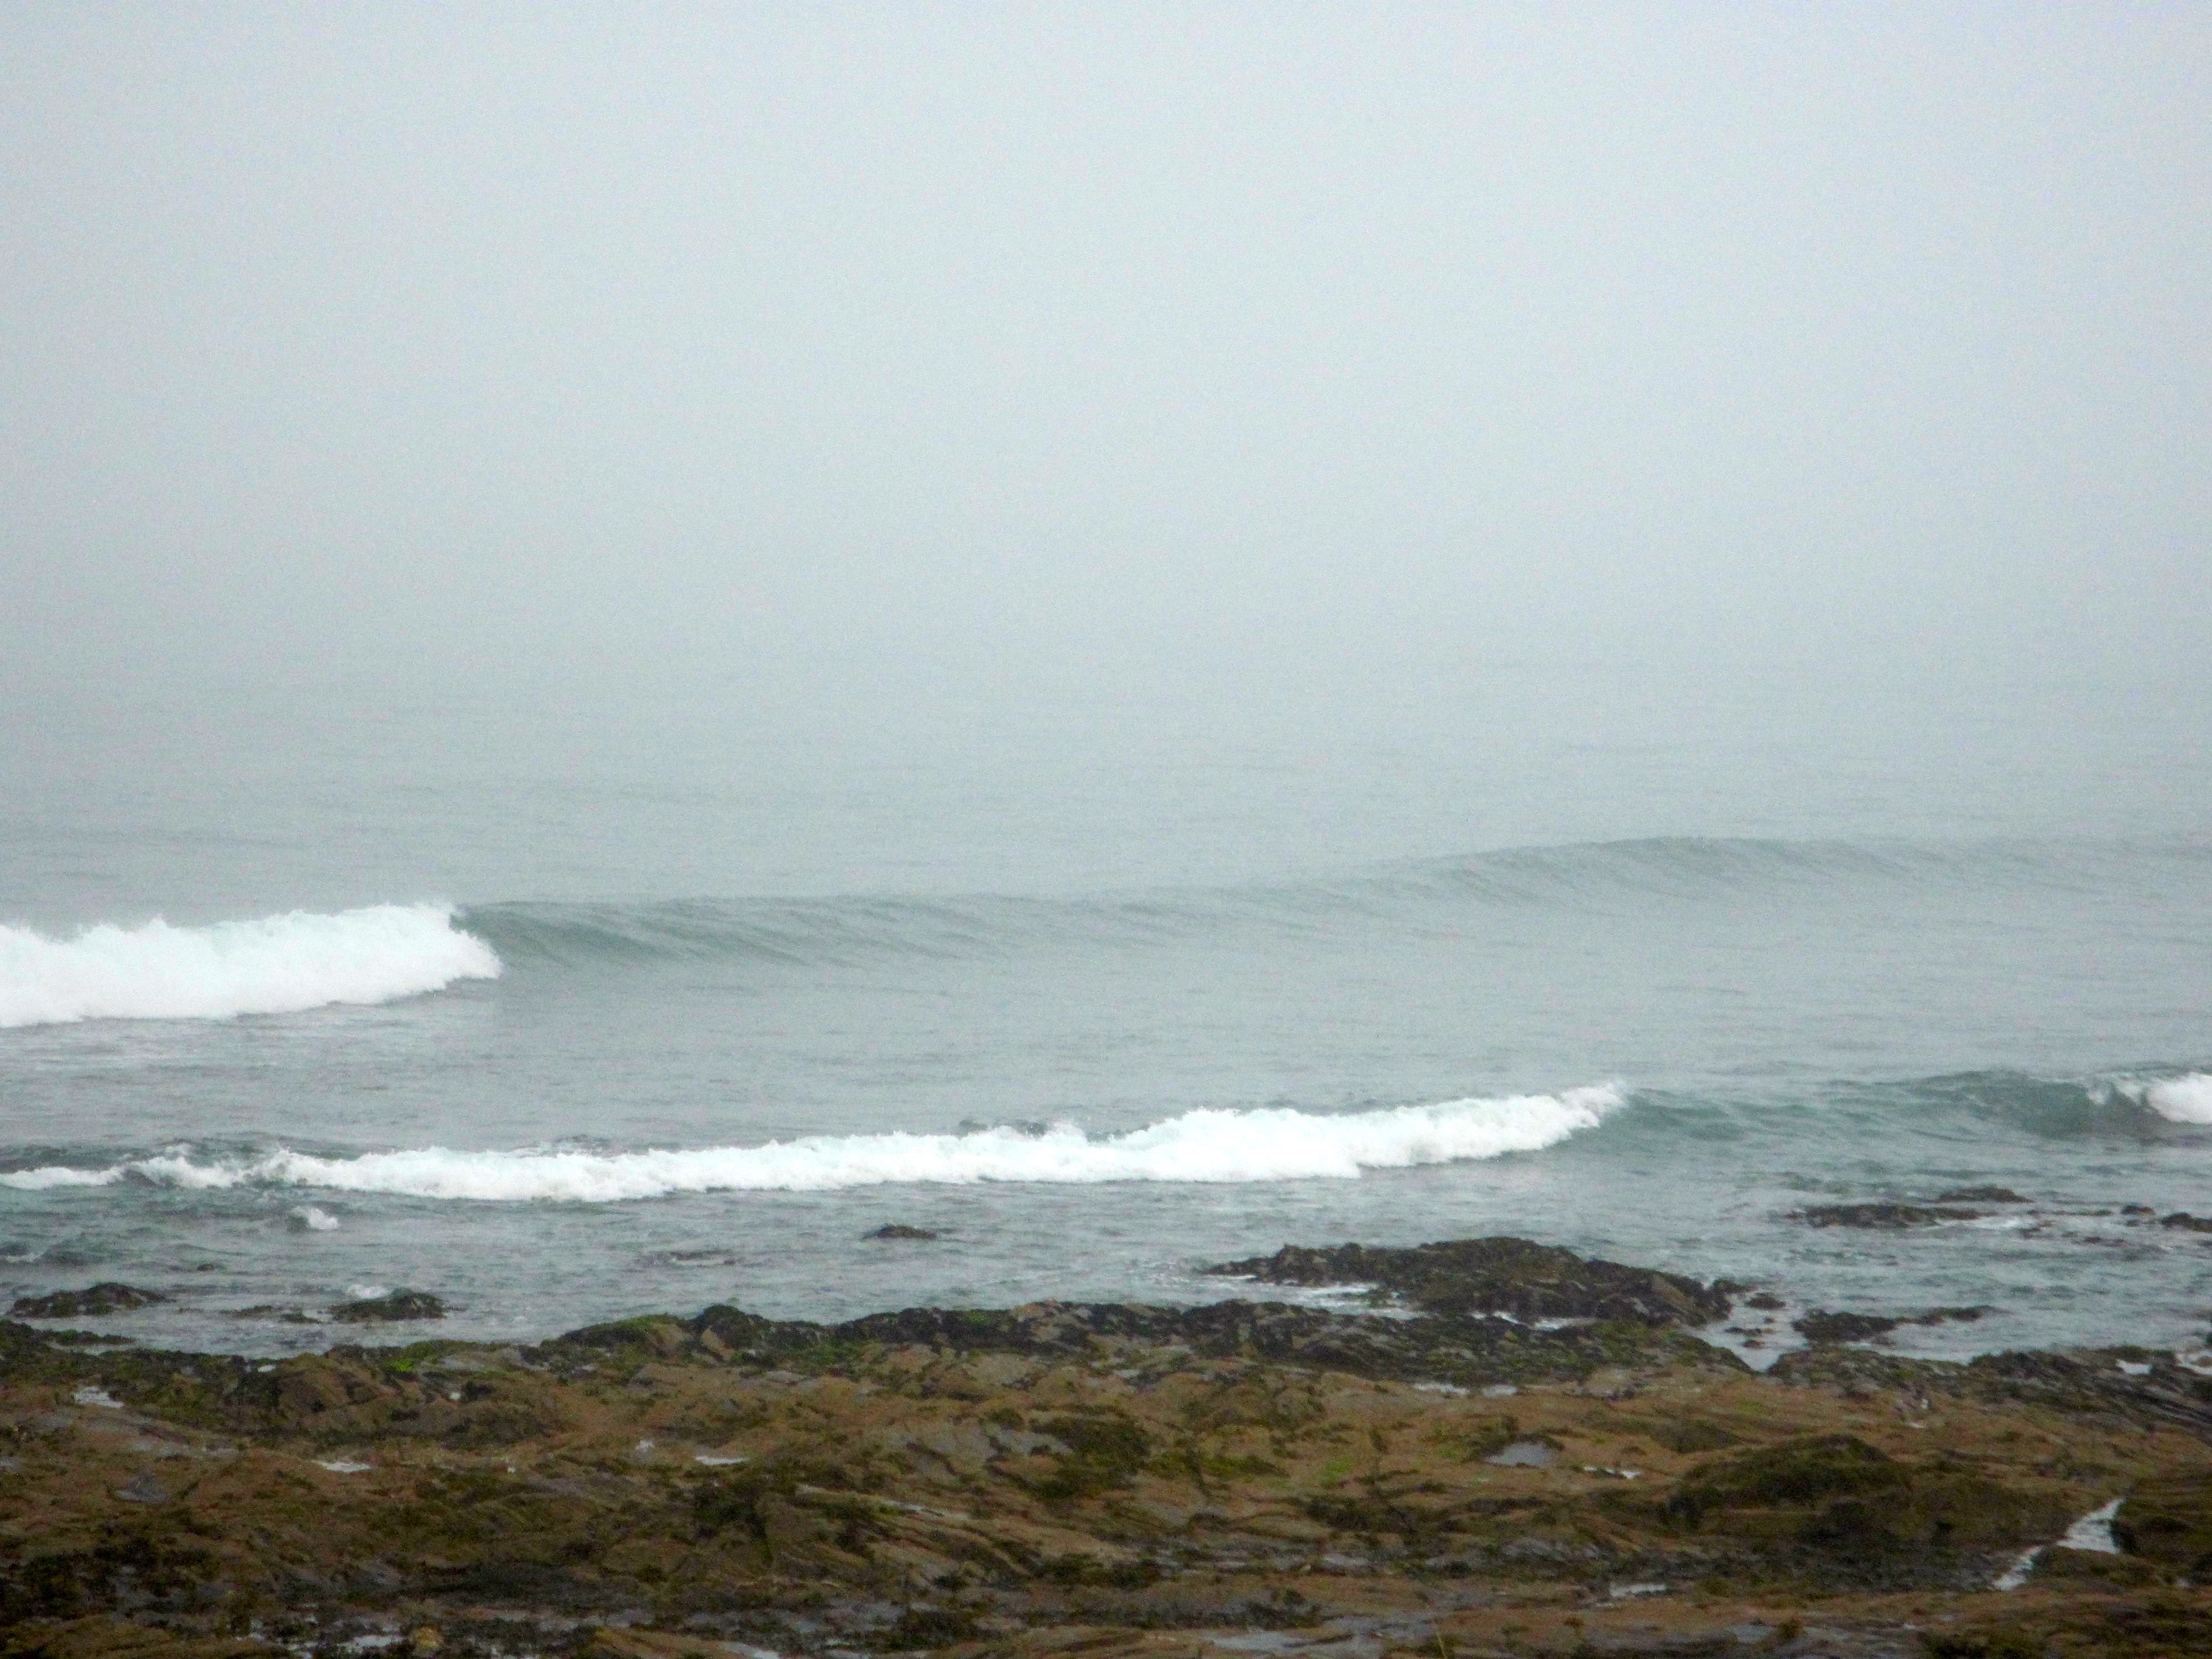 Surf Report for Wednesday 23rd July 2014